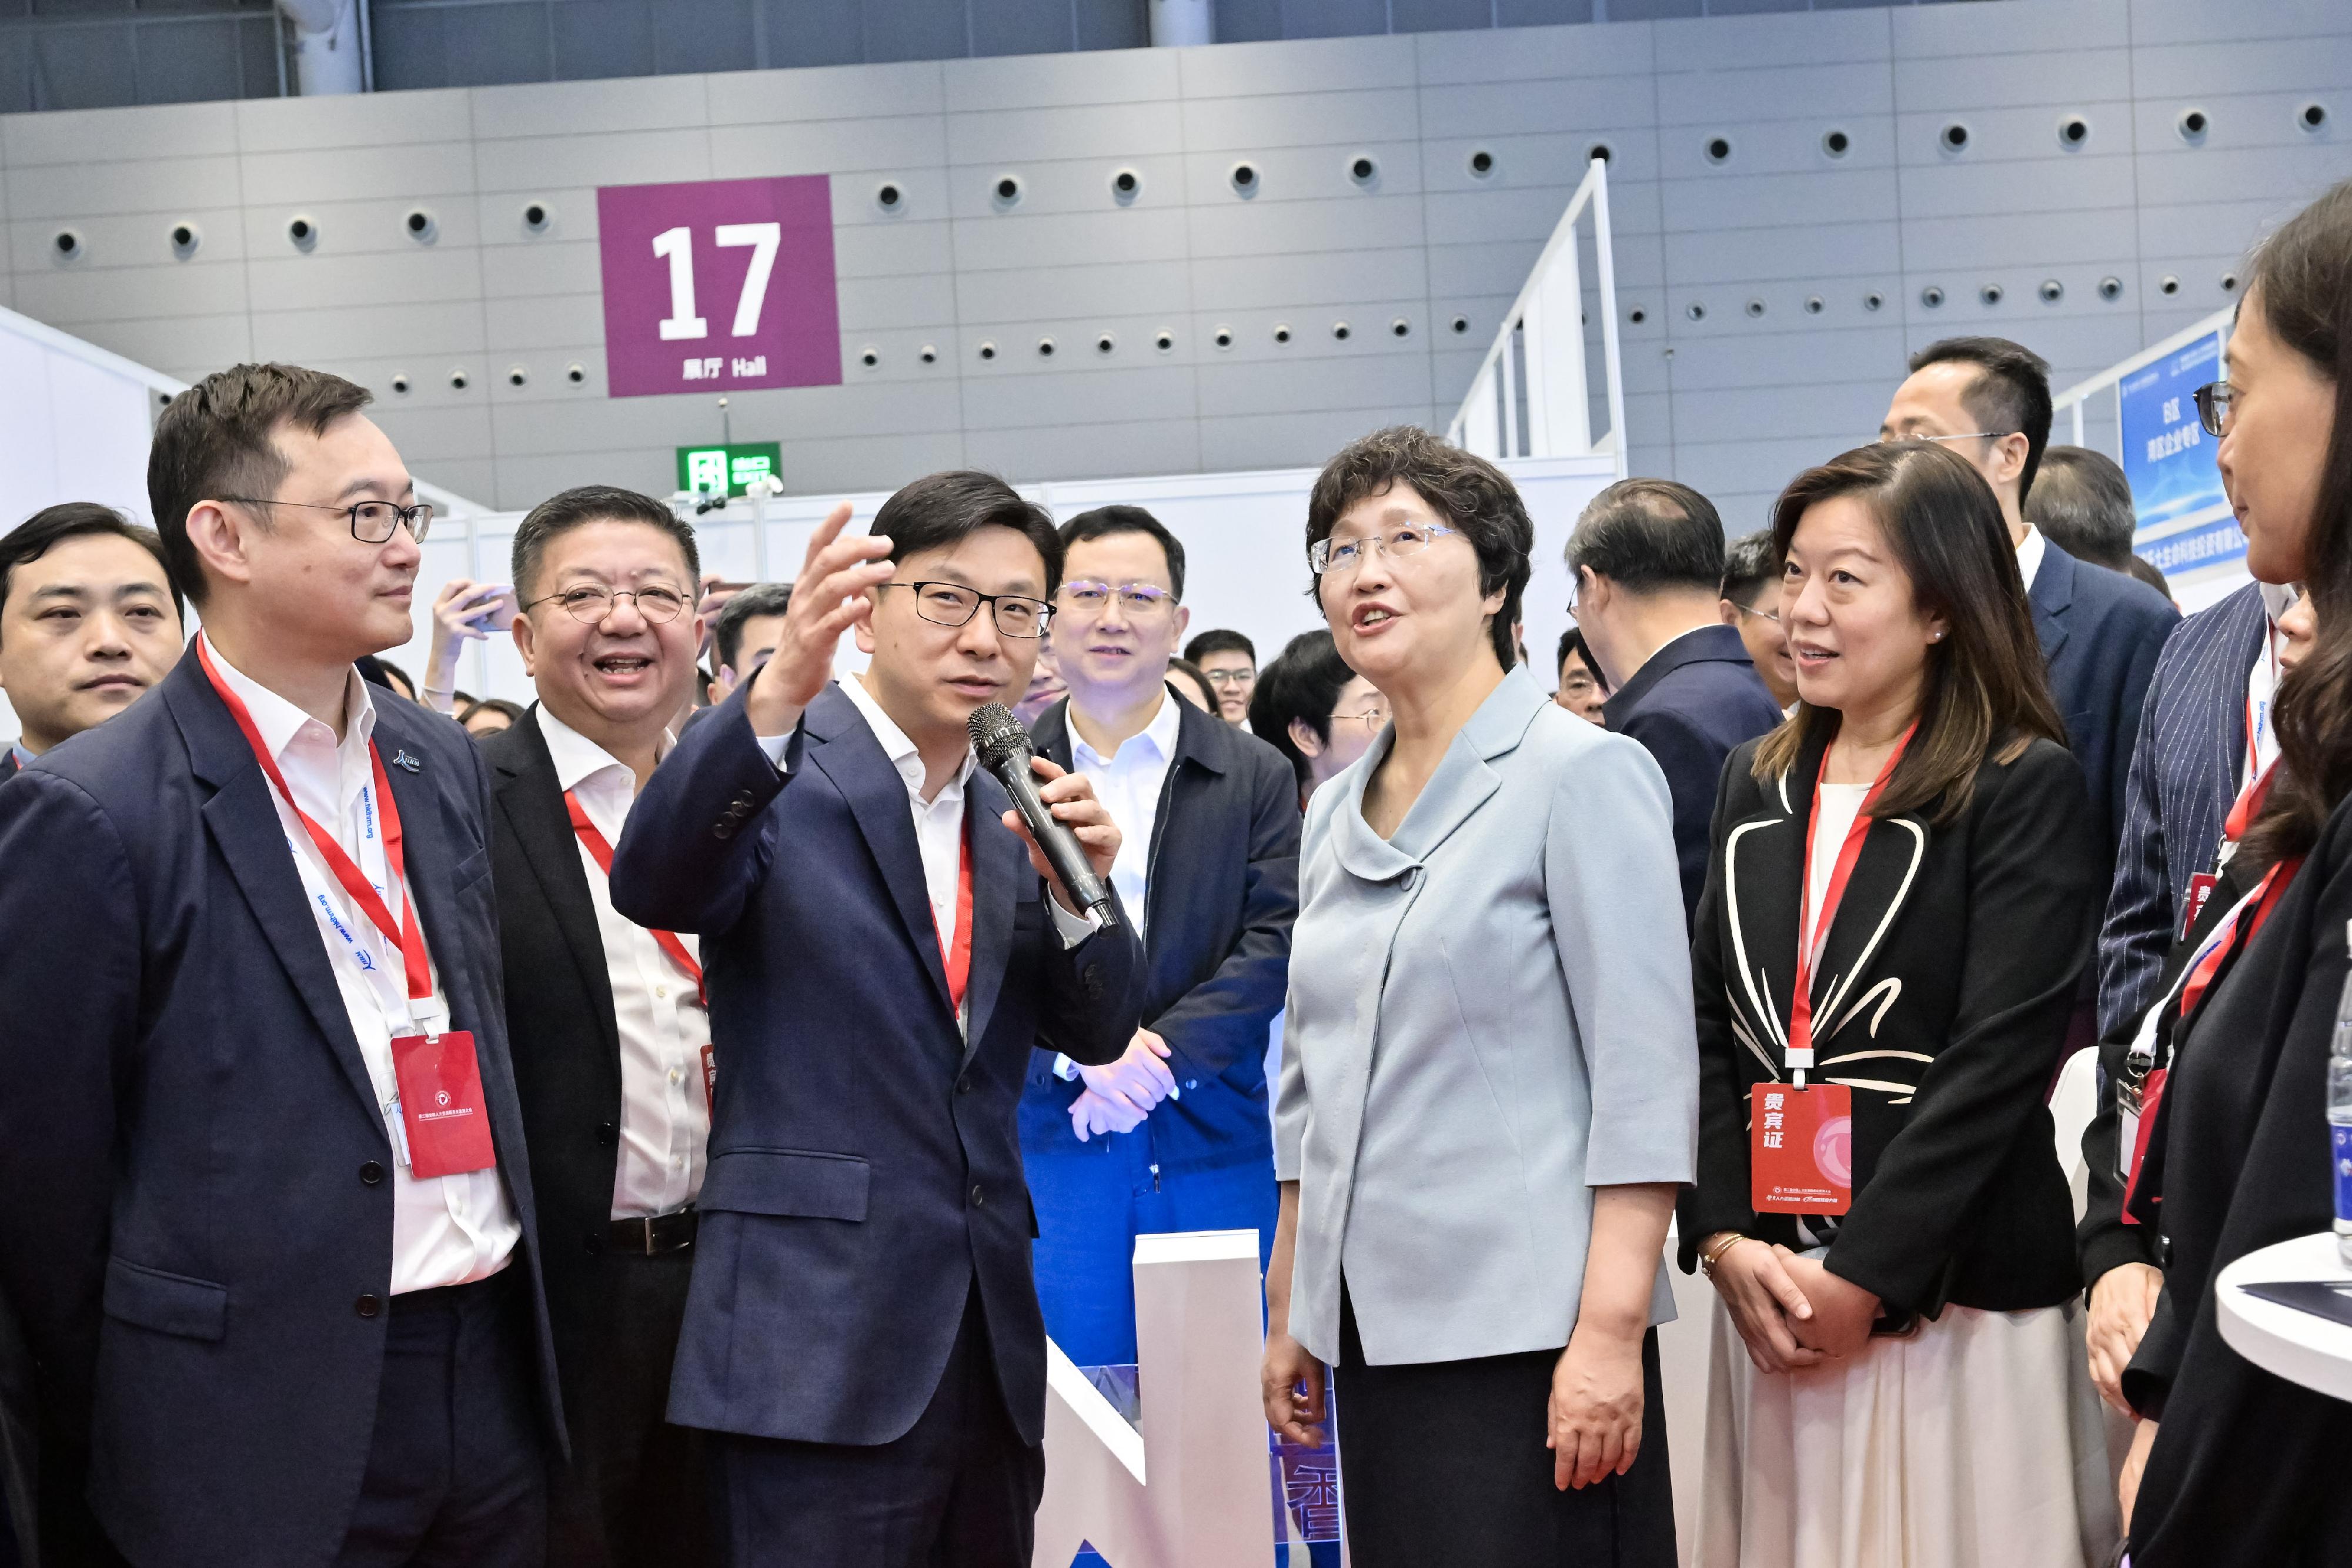 The Secretary for Labour and Welfare, Mr Chris Sun, today (November 22) led a Hong Kong Special Administrative Region delegation to attend the 2nd National Conference on the Development of Human Resources Services in Shenzhen. Photo shows Mr Sun (front row, second left), accompanied by the Commissioner for Labour, Ms May Chan (front row, fourth left), and the Director of Hong Kong Talent Engage (HKTE), Mr Anthony Lau (back row, second left), briefing the Minister of Human Resources and Social Security, Ms Wang Xiaoping (front row, third left), on the HKTE exhibition area this morning.